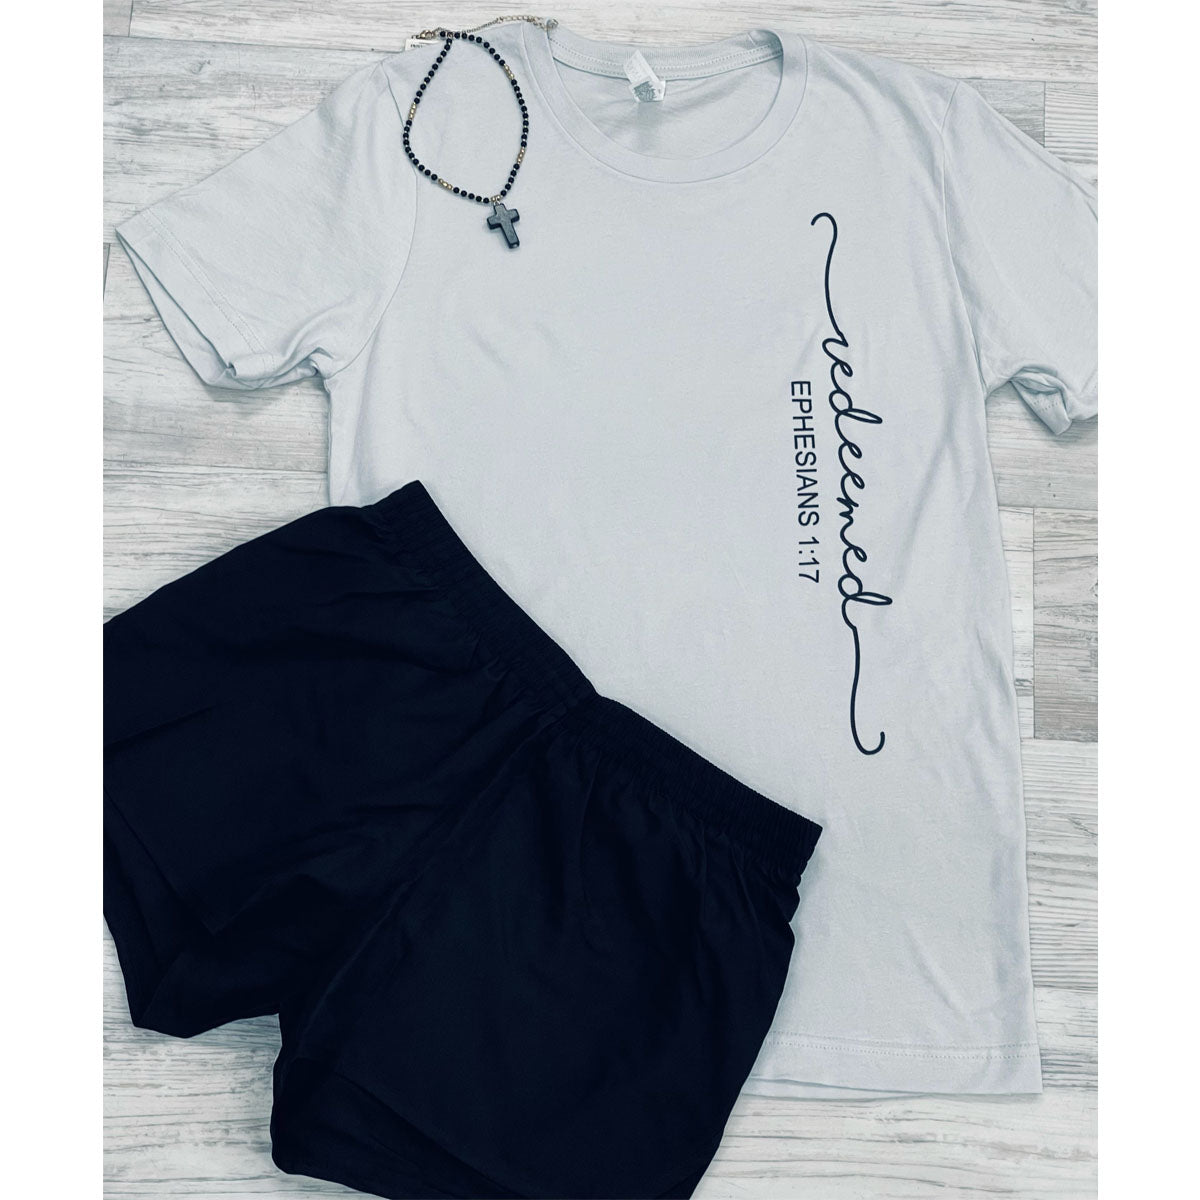 Redeemed Set (Silver Tee/Black Shorts) - Southern Grace Creations